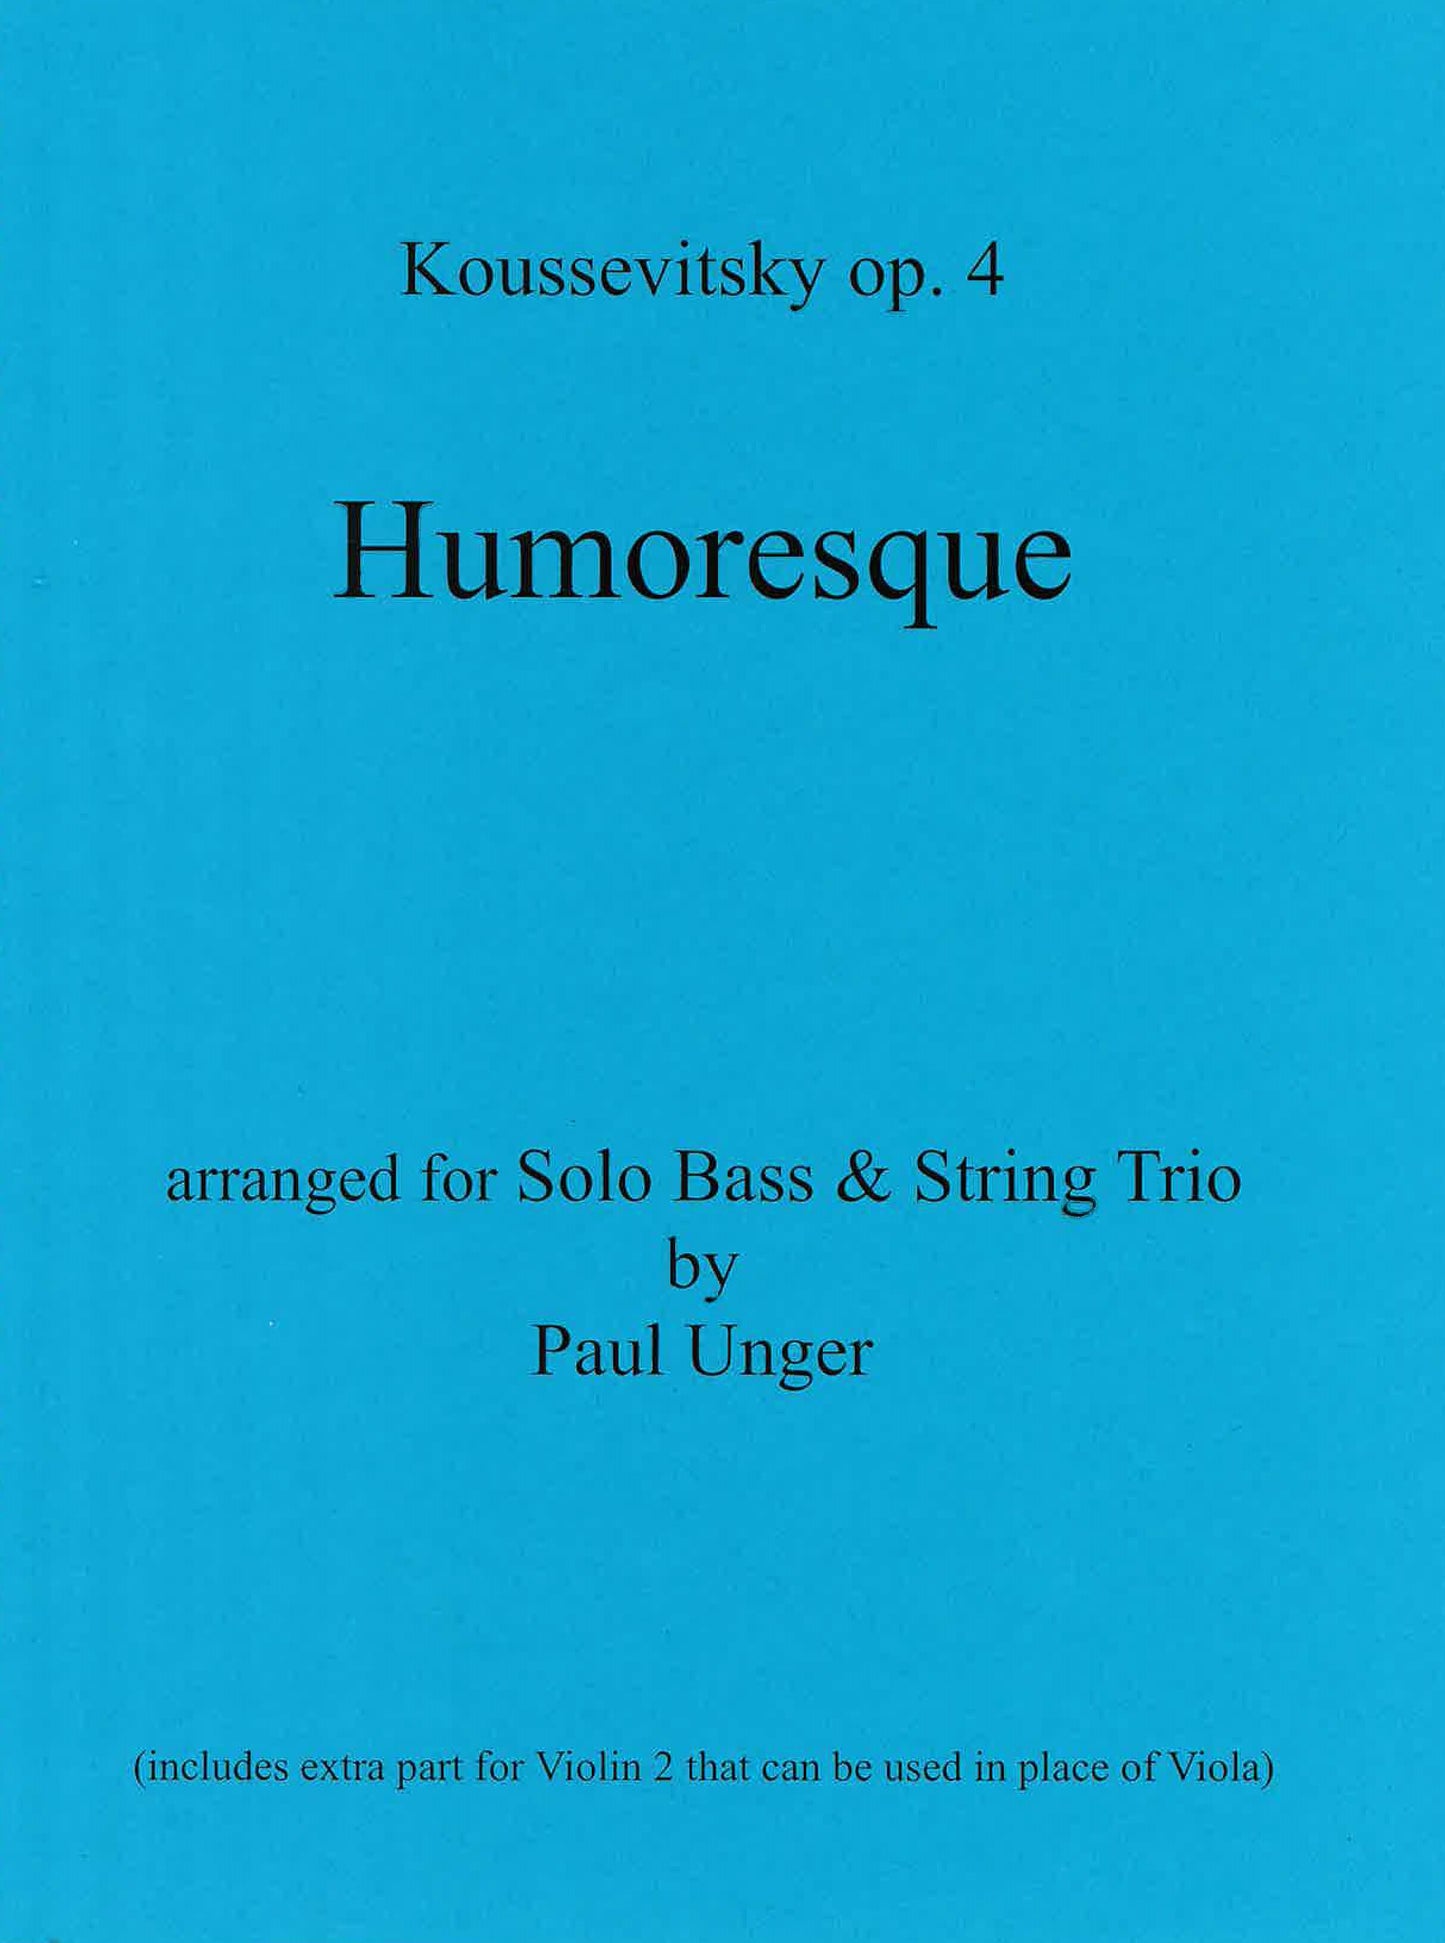 Koussevitzky: Humoresque op. 4 Arranged by Paul Unger for Solo Bass & Trio